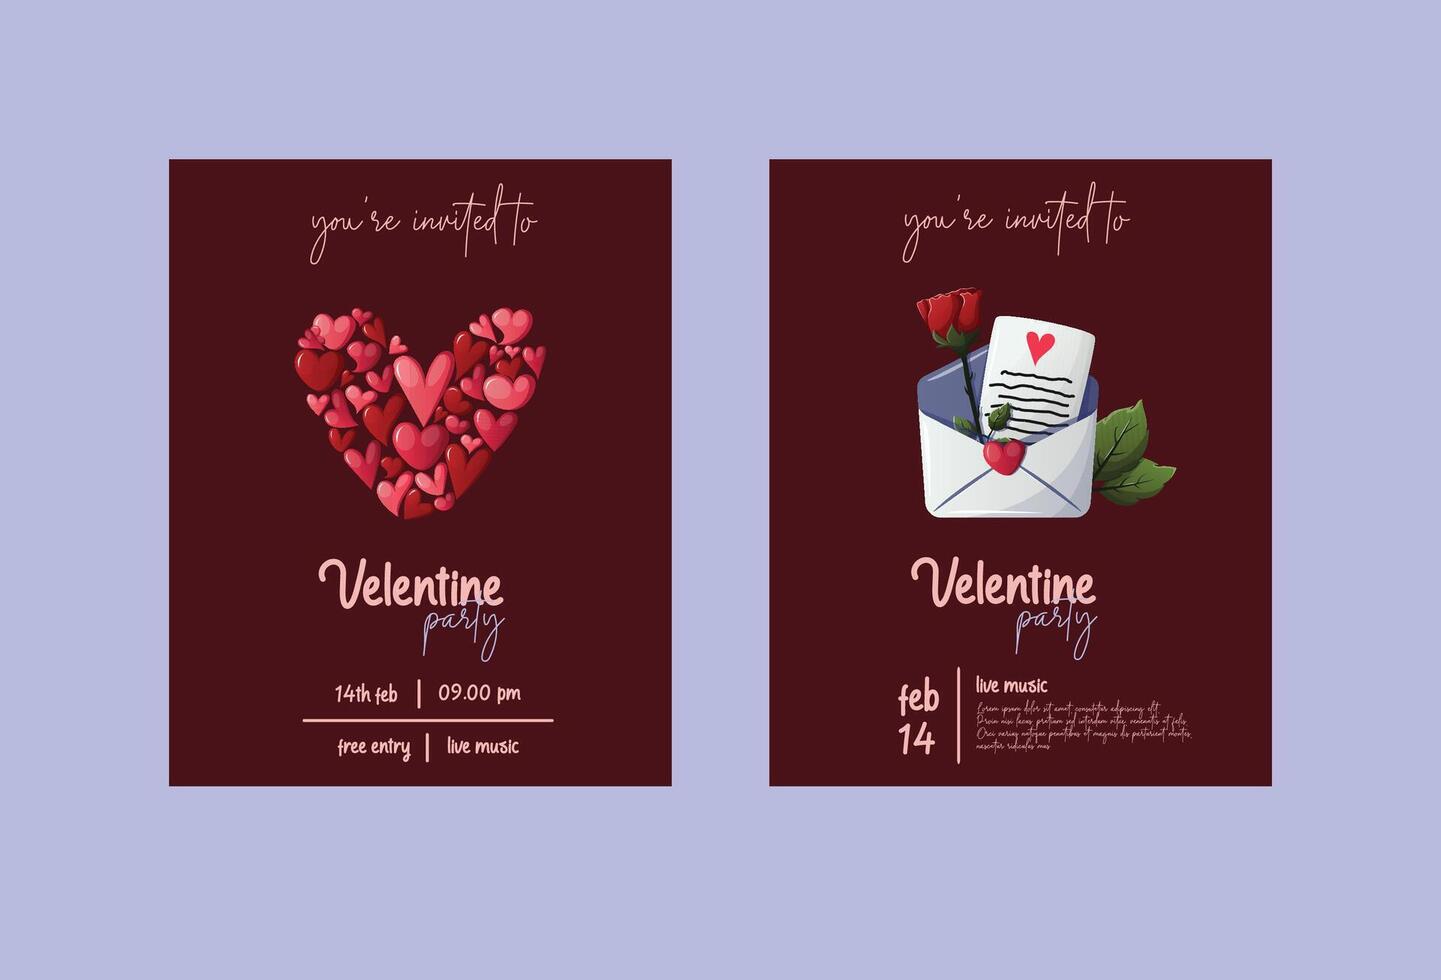 valentine party invitation with illustration vector